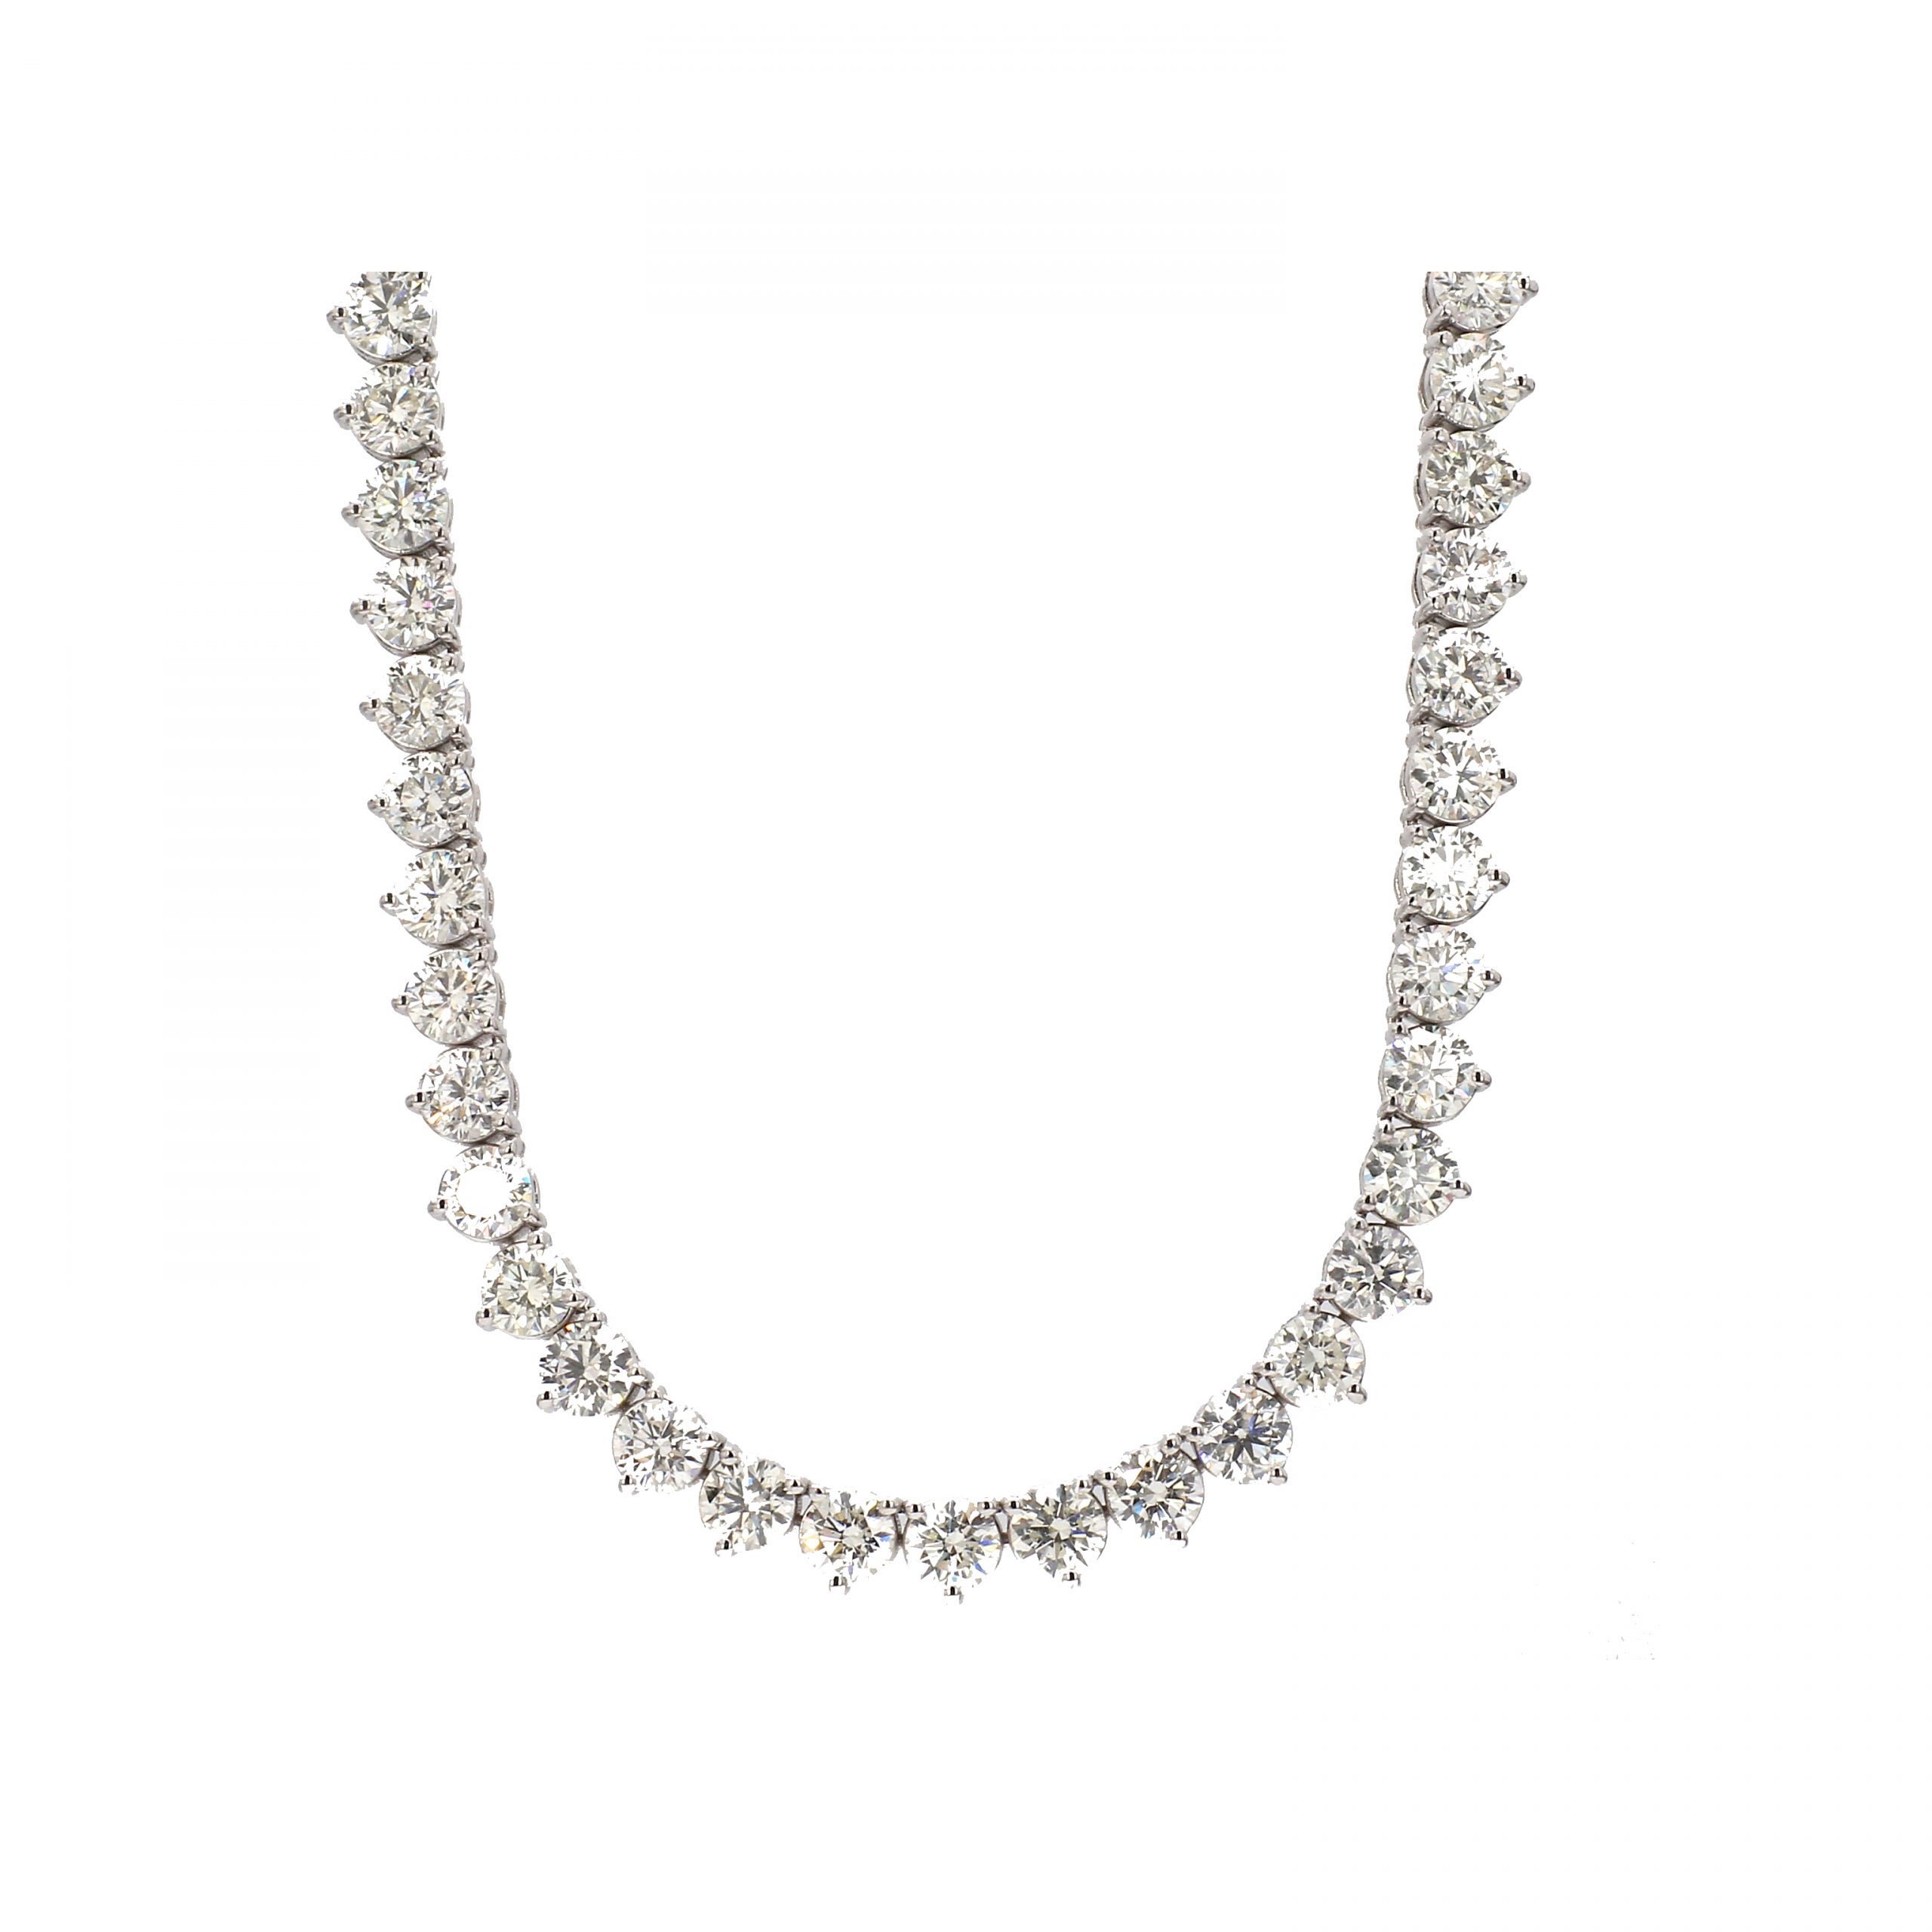 Riviera Demi Necklace with Diamonds, 1 Carat Total Weight in 18K White Gold  - Kwiat